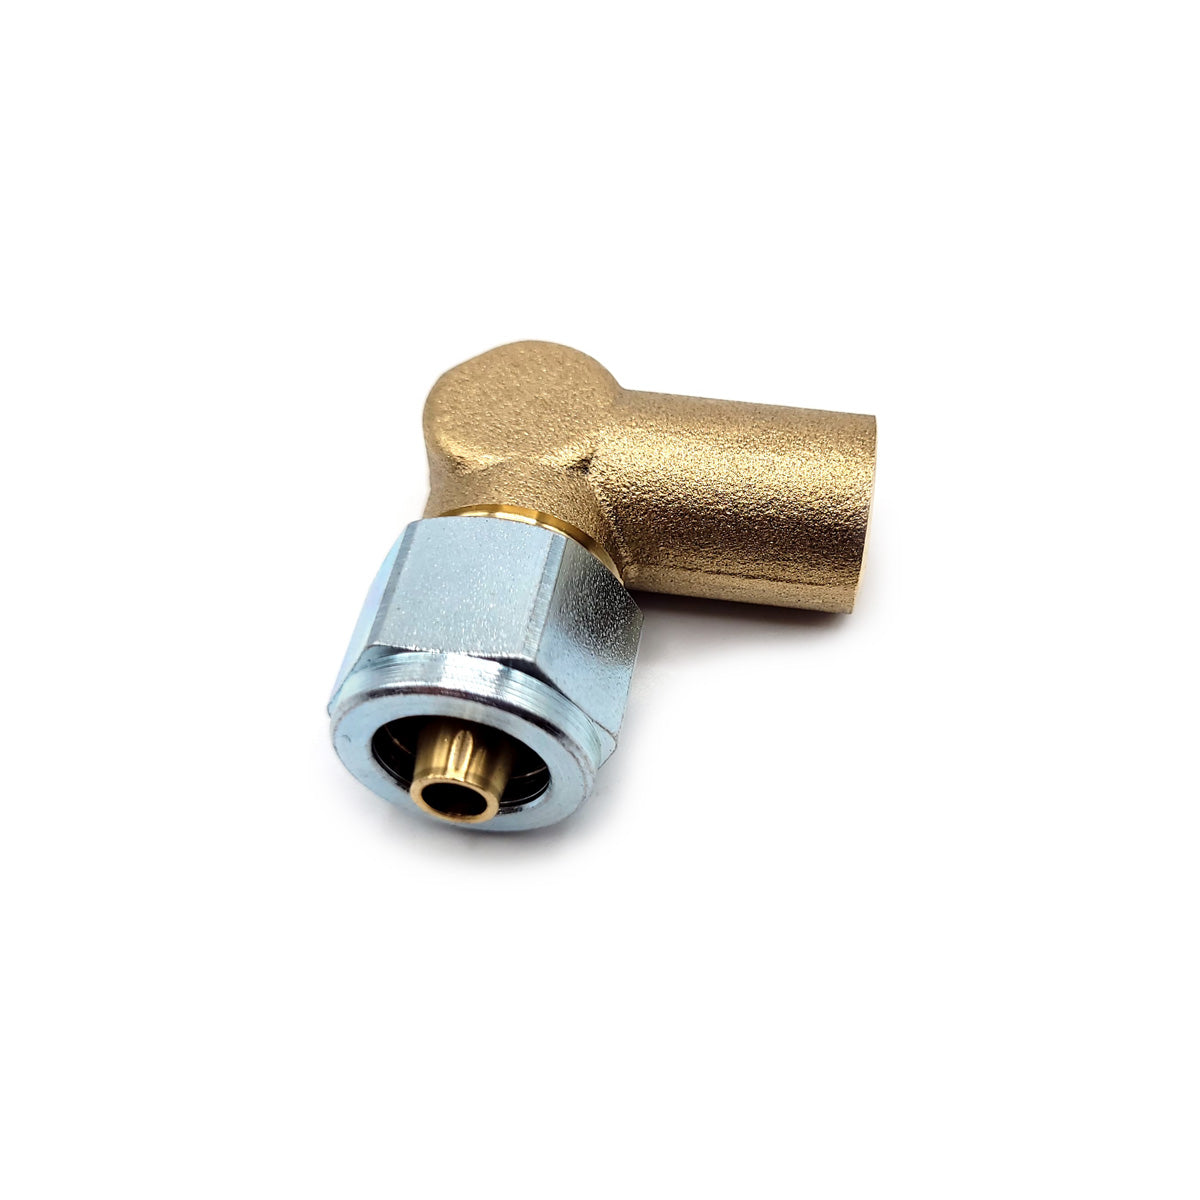 LPG 8mm Pipe Hose Angled Elbow Connector with G 1/4 Female Inlet